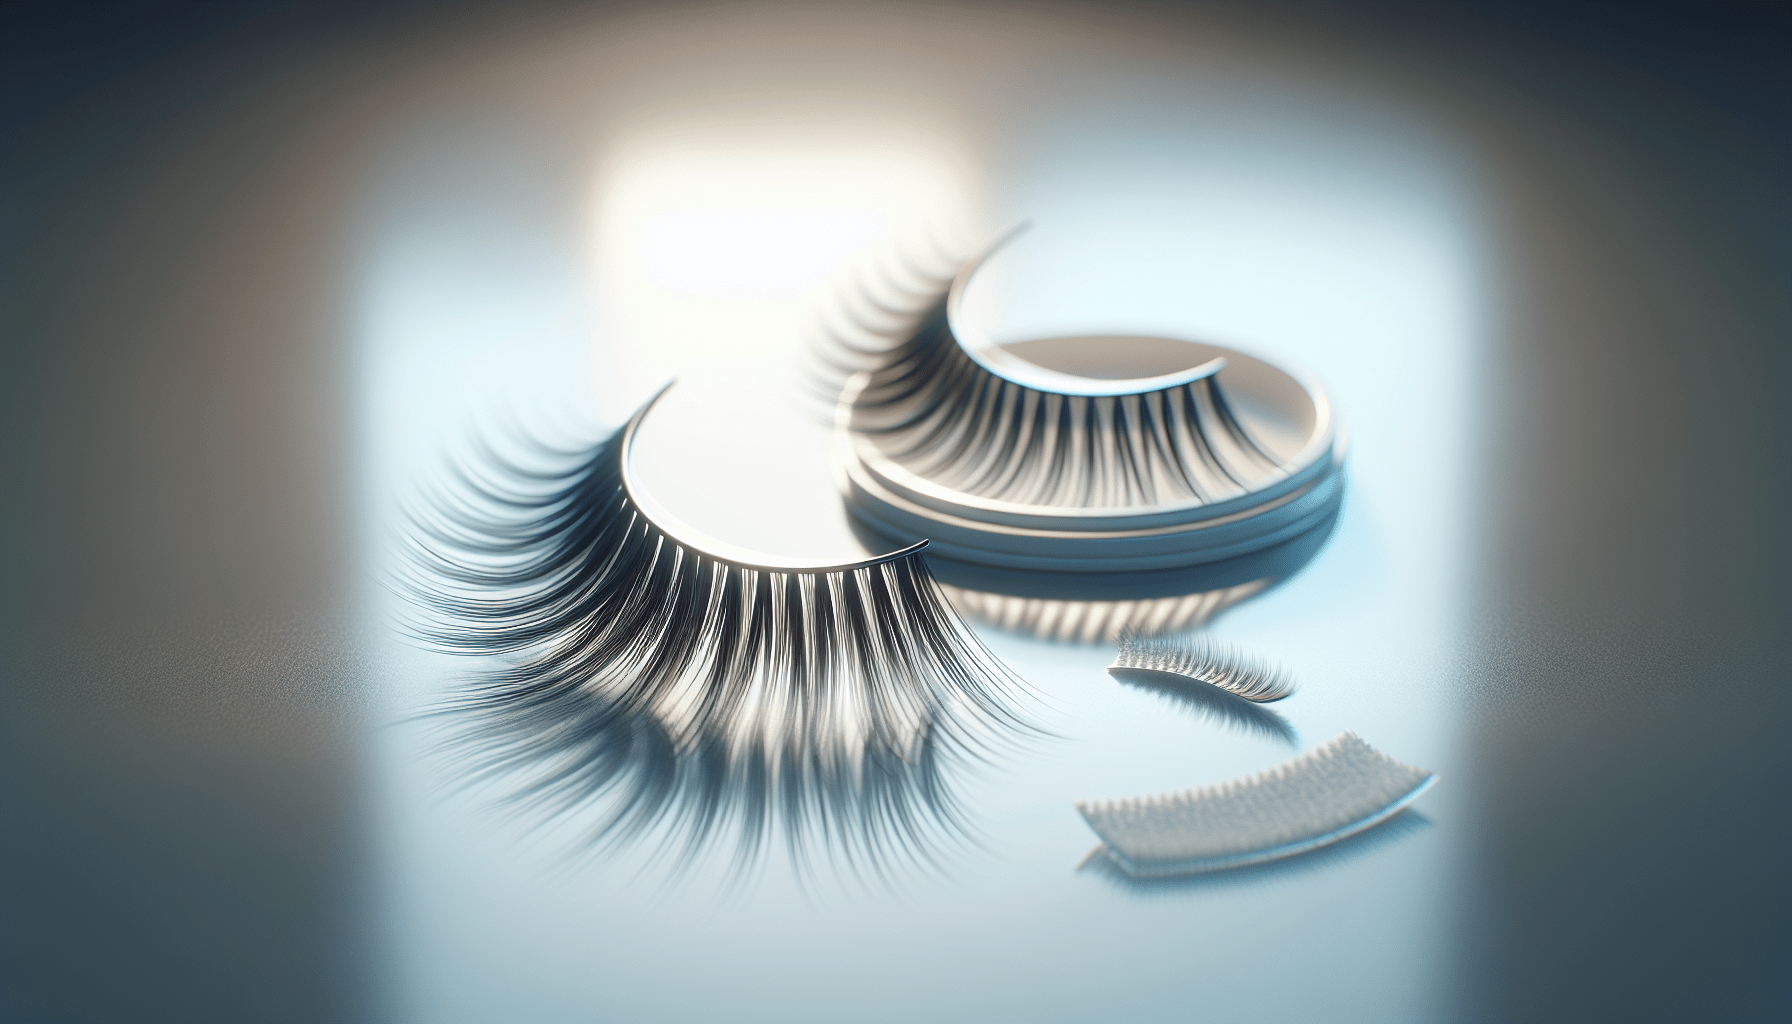 Can I Reapply False Eyelashes That Have Fallen Off During The Day?